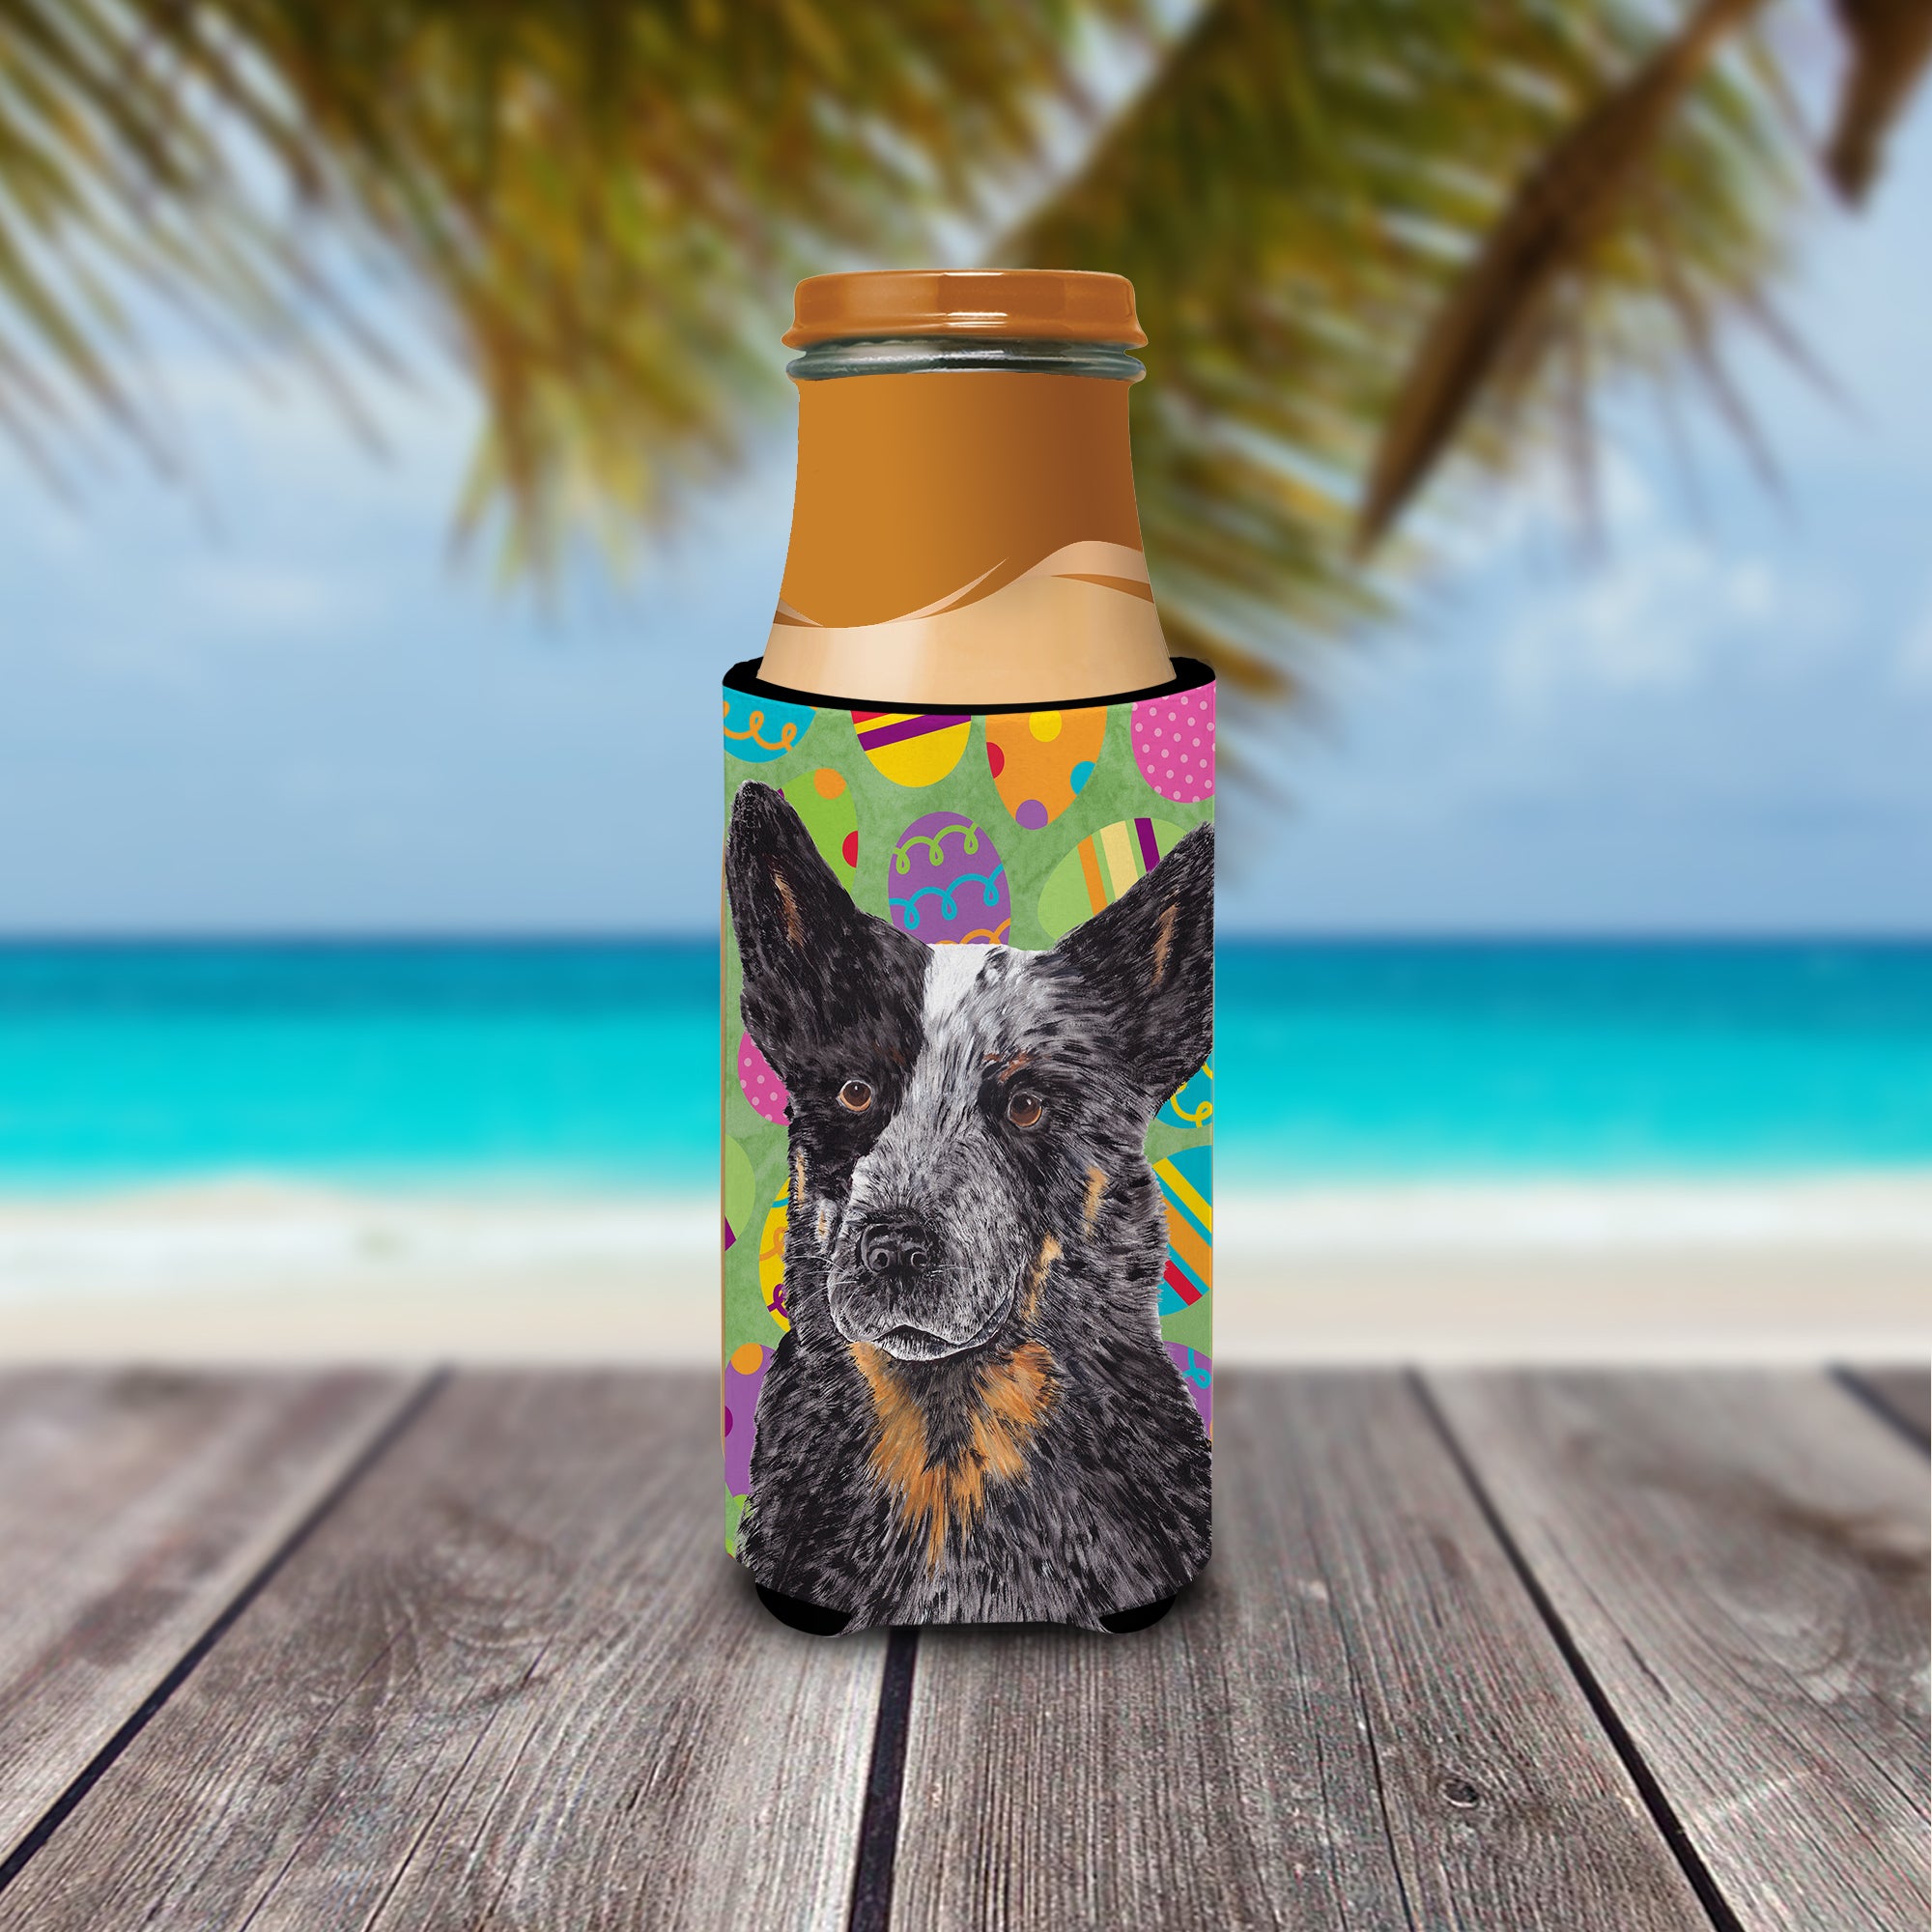 Australian Cattle Dog Easter Eggtravaganza Ultra Beverage Insulators for slim cans SC9476MUK